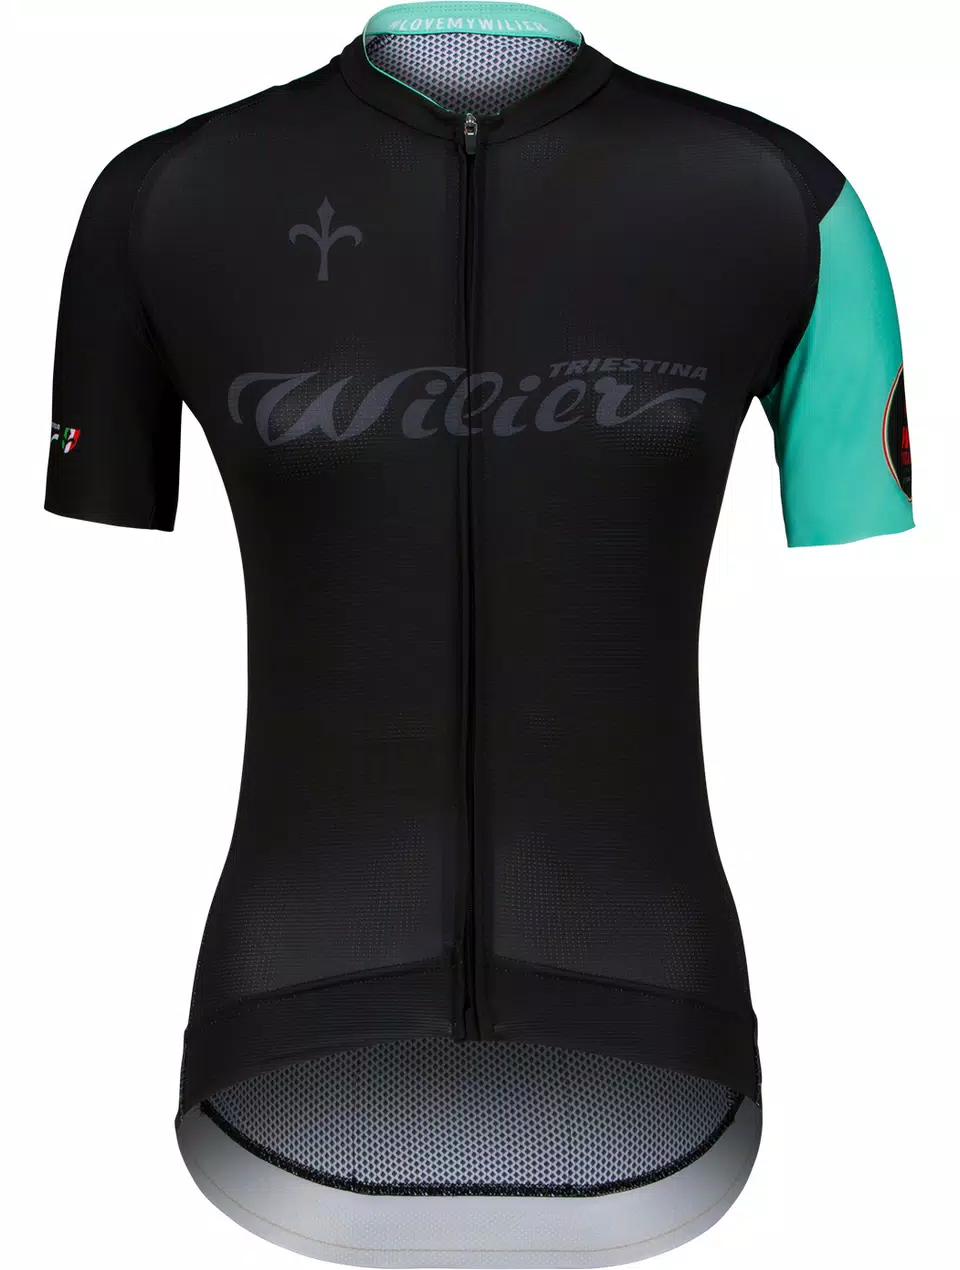 Femme maillot Wilier Cycling Club noir